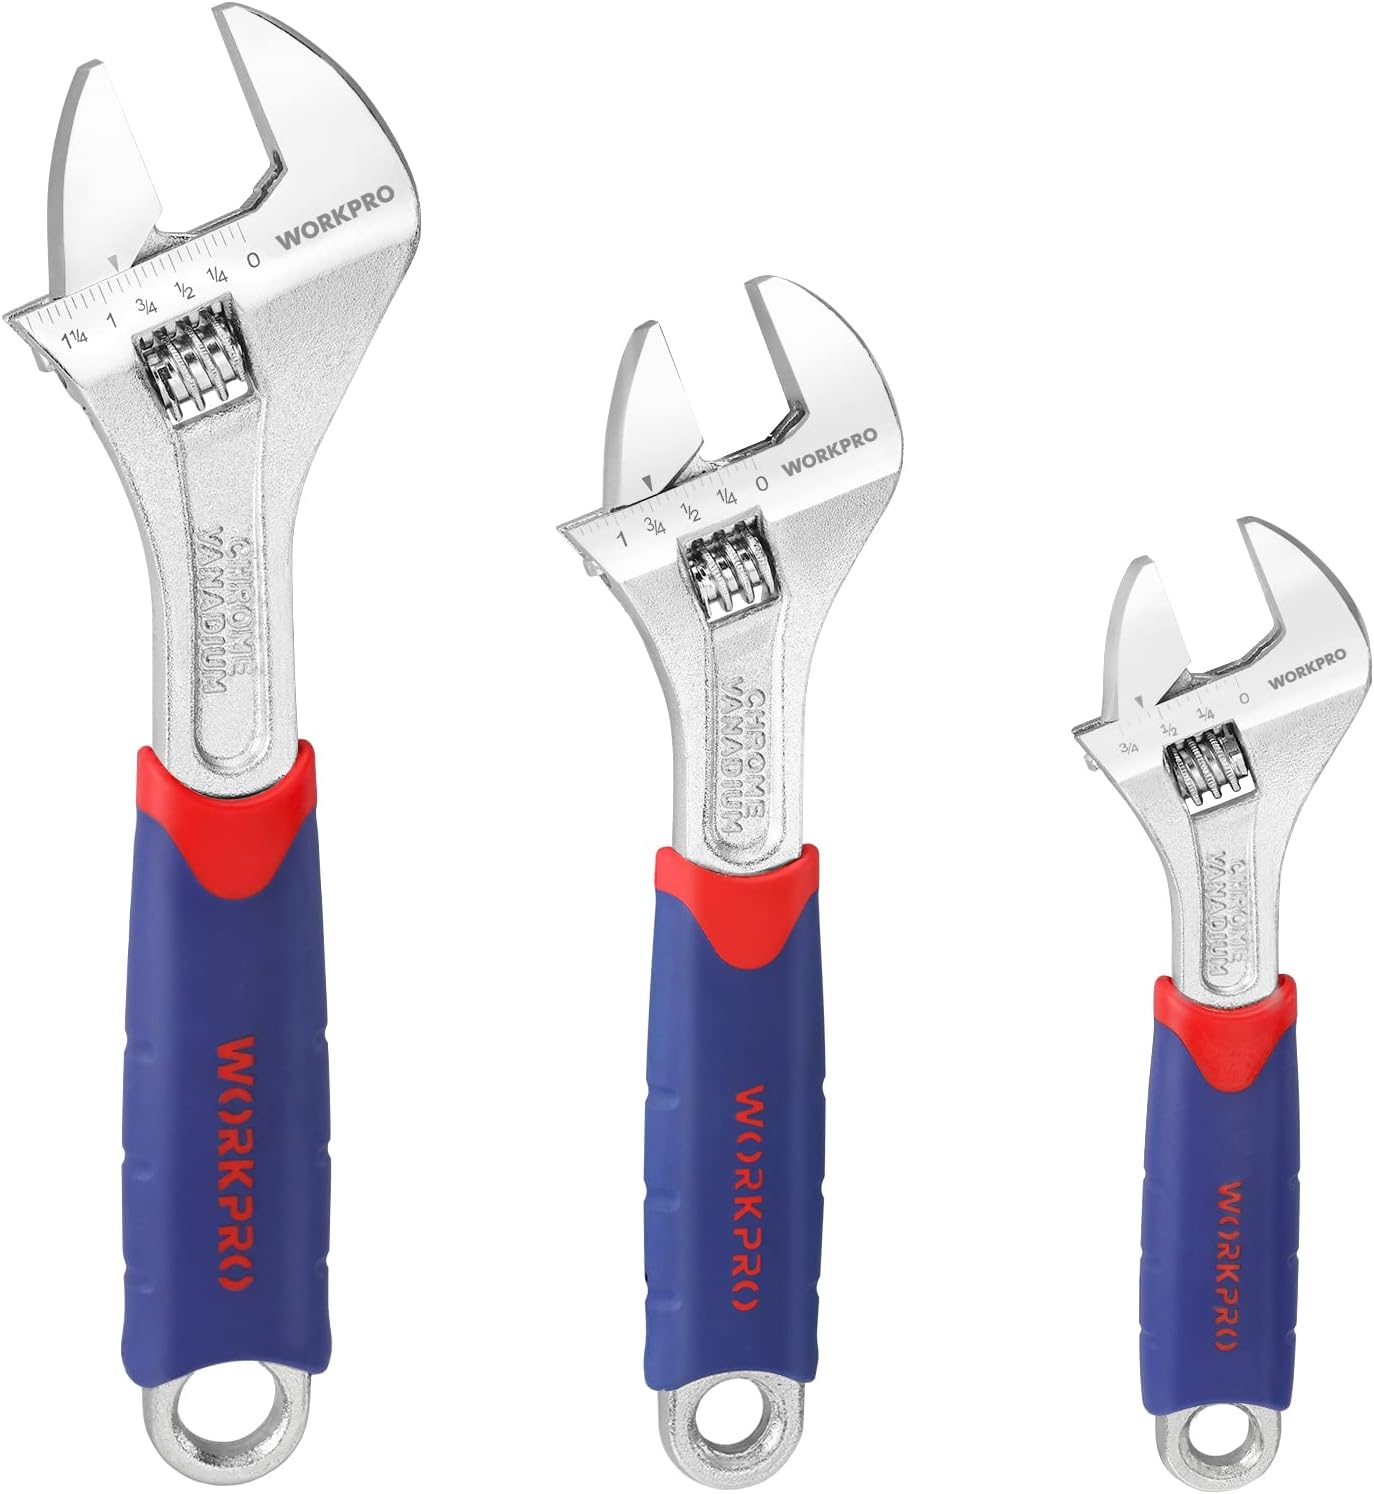 WORKPRO 3-piece Adjustable Wrench Set CR-V with [...]